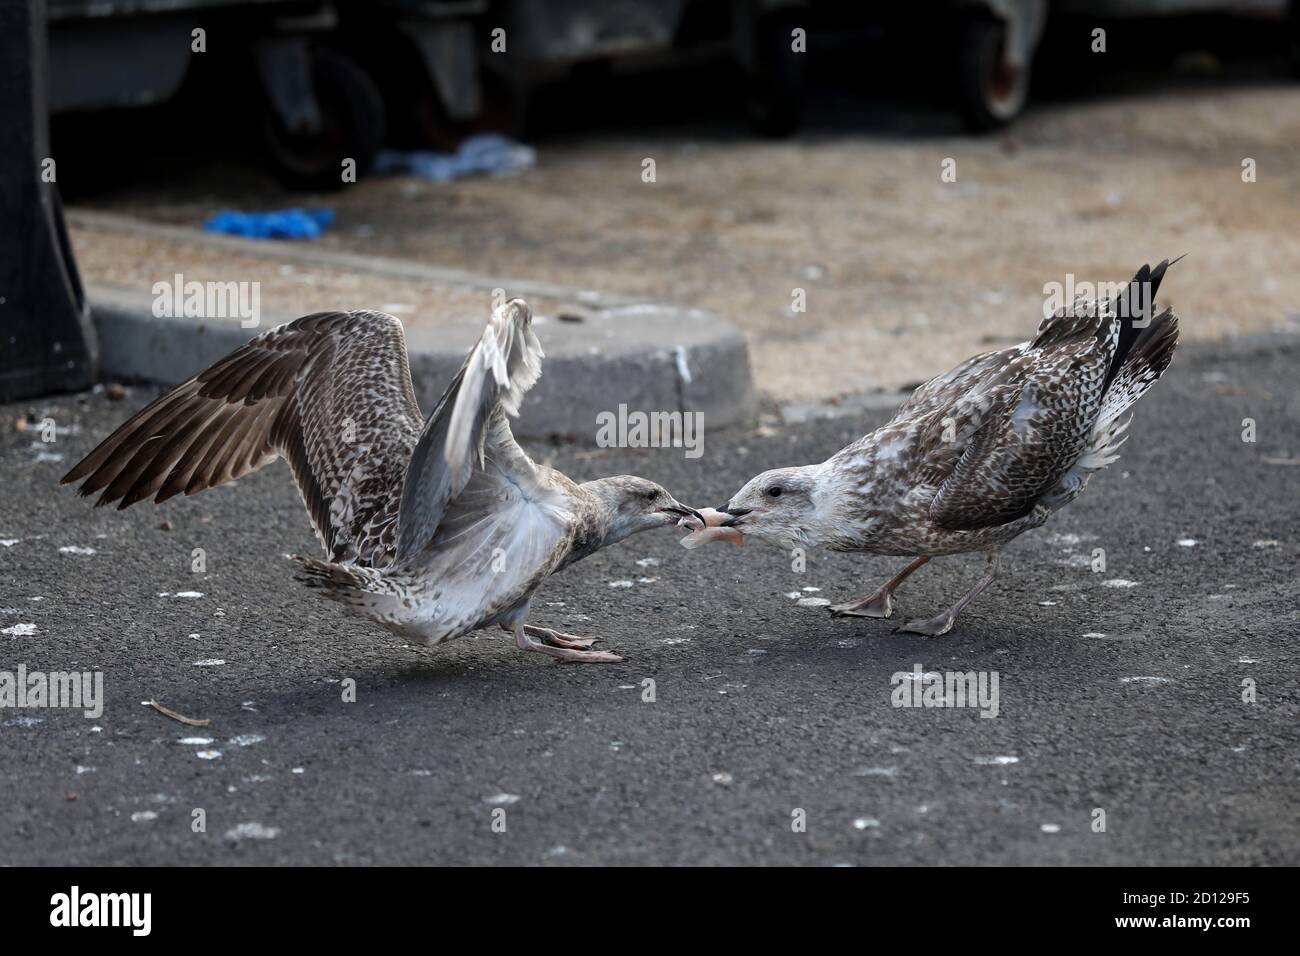 Seagulls fighting over fish around the bins at the fish market in Hastings, East Sussex, UK. Stock Photo